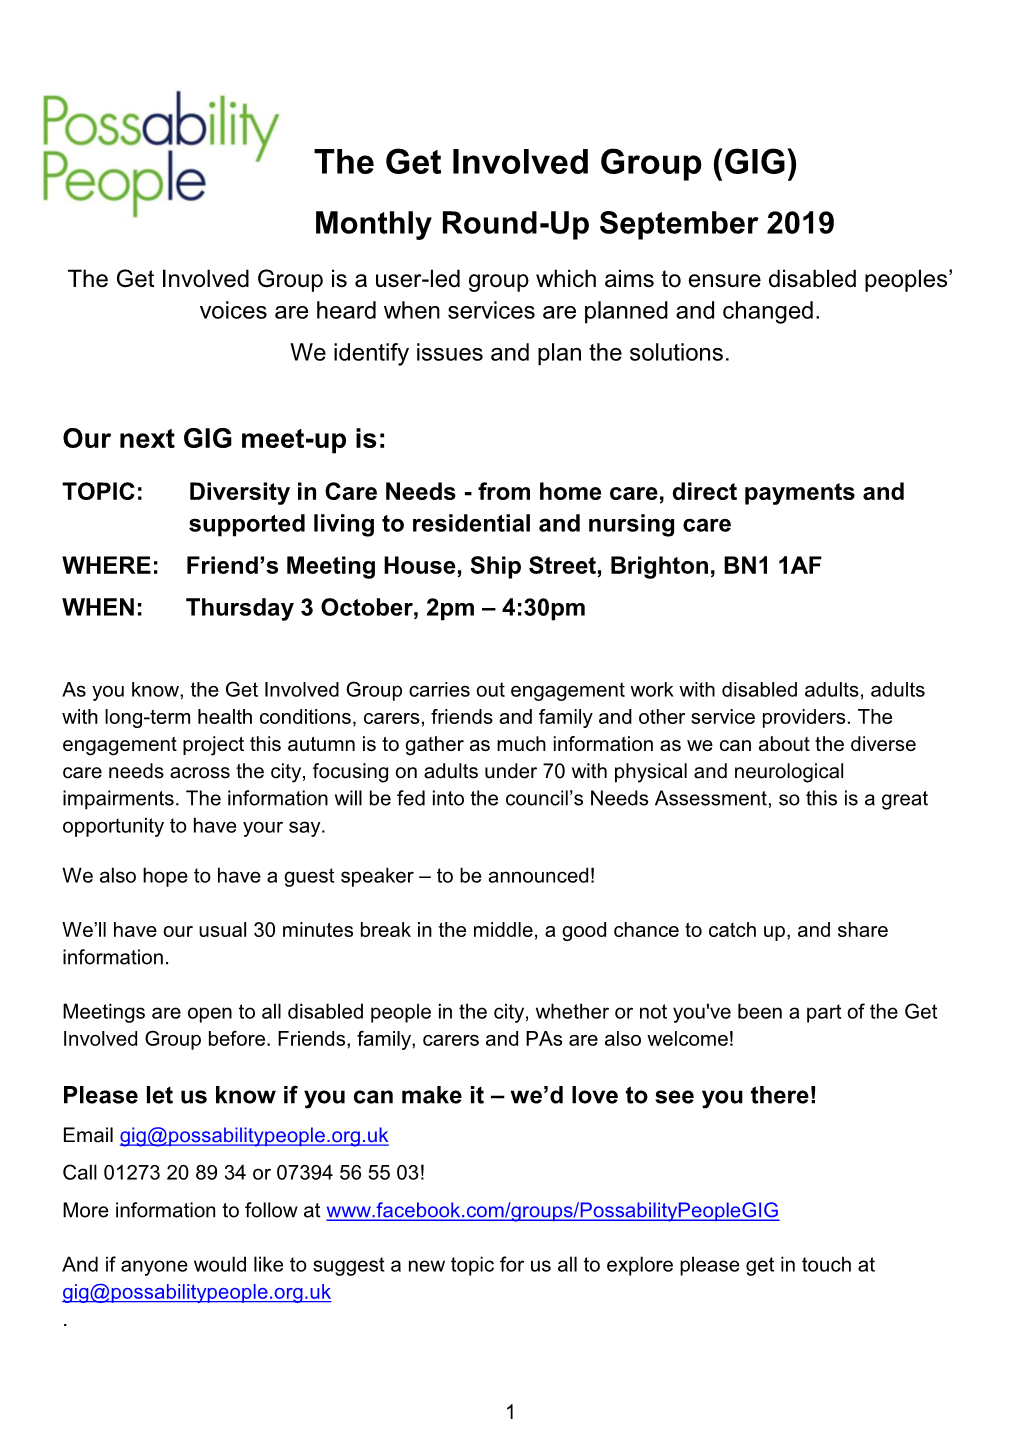 The Get Involved Group (GIG) Monthly Round-Up September 2019